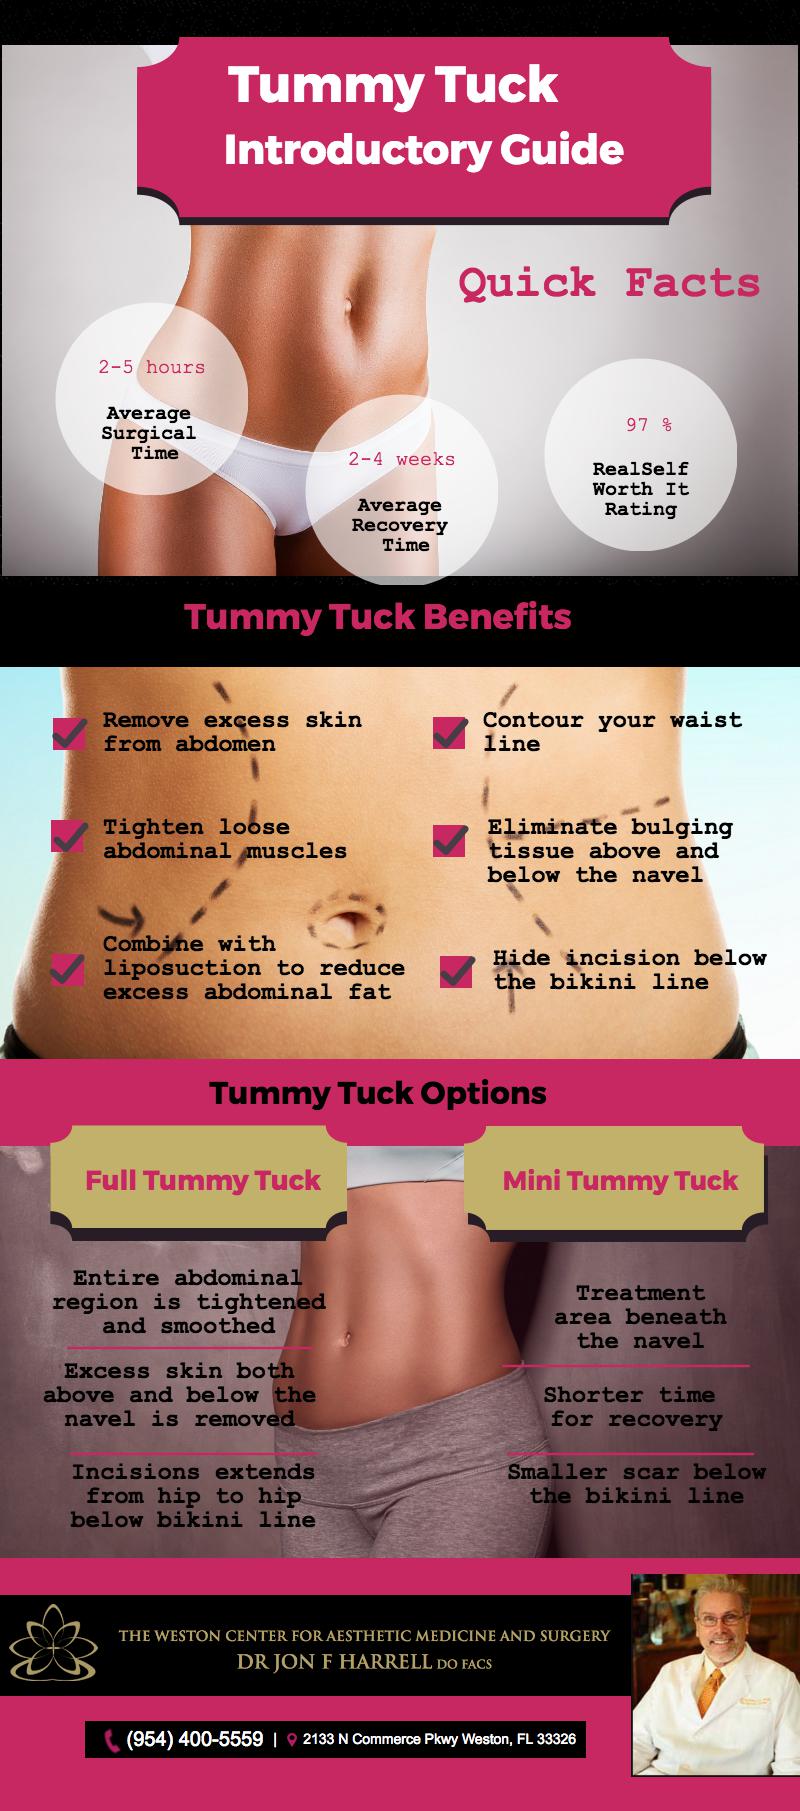 Tummy Tuck Introductory Guide